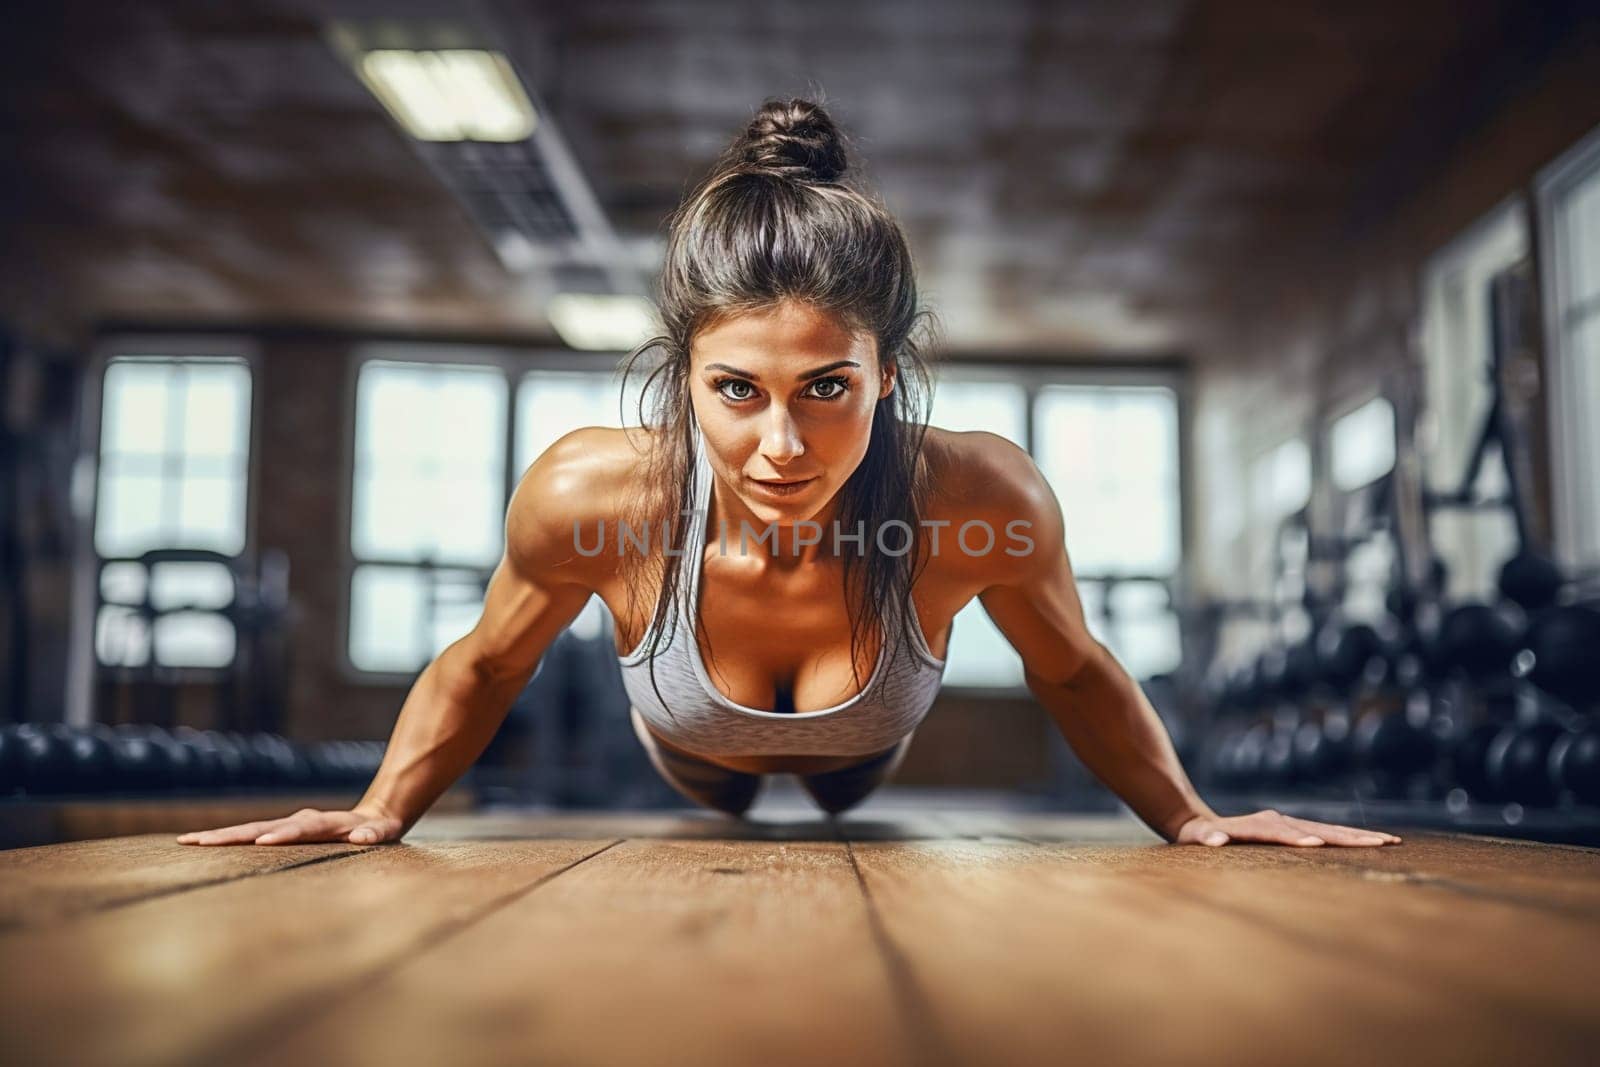 An athletic woman does push-ups at the gym. High quality photo